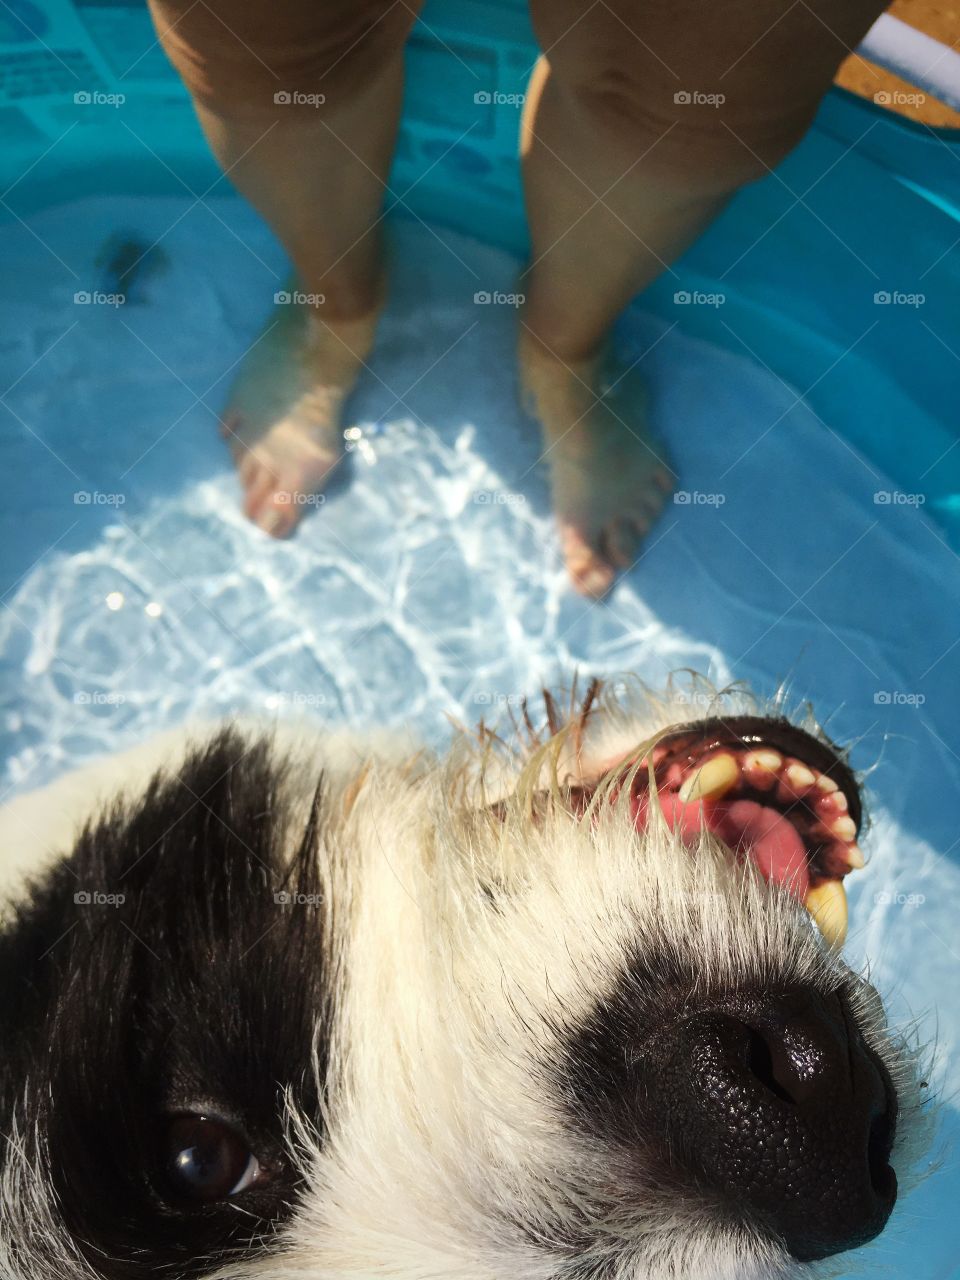 Our dog gizzy enjoying the pool